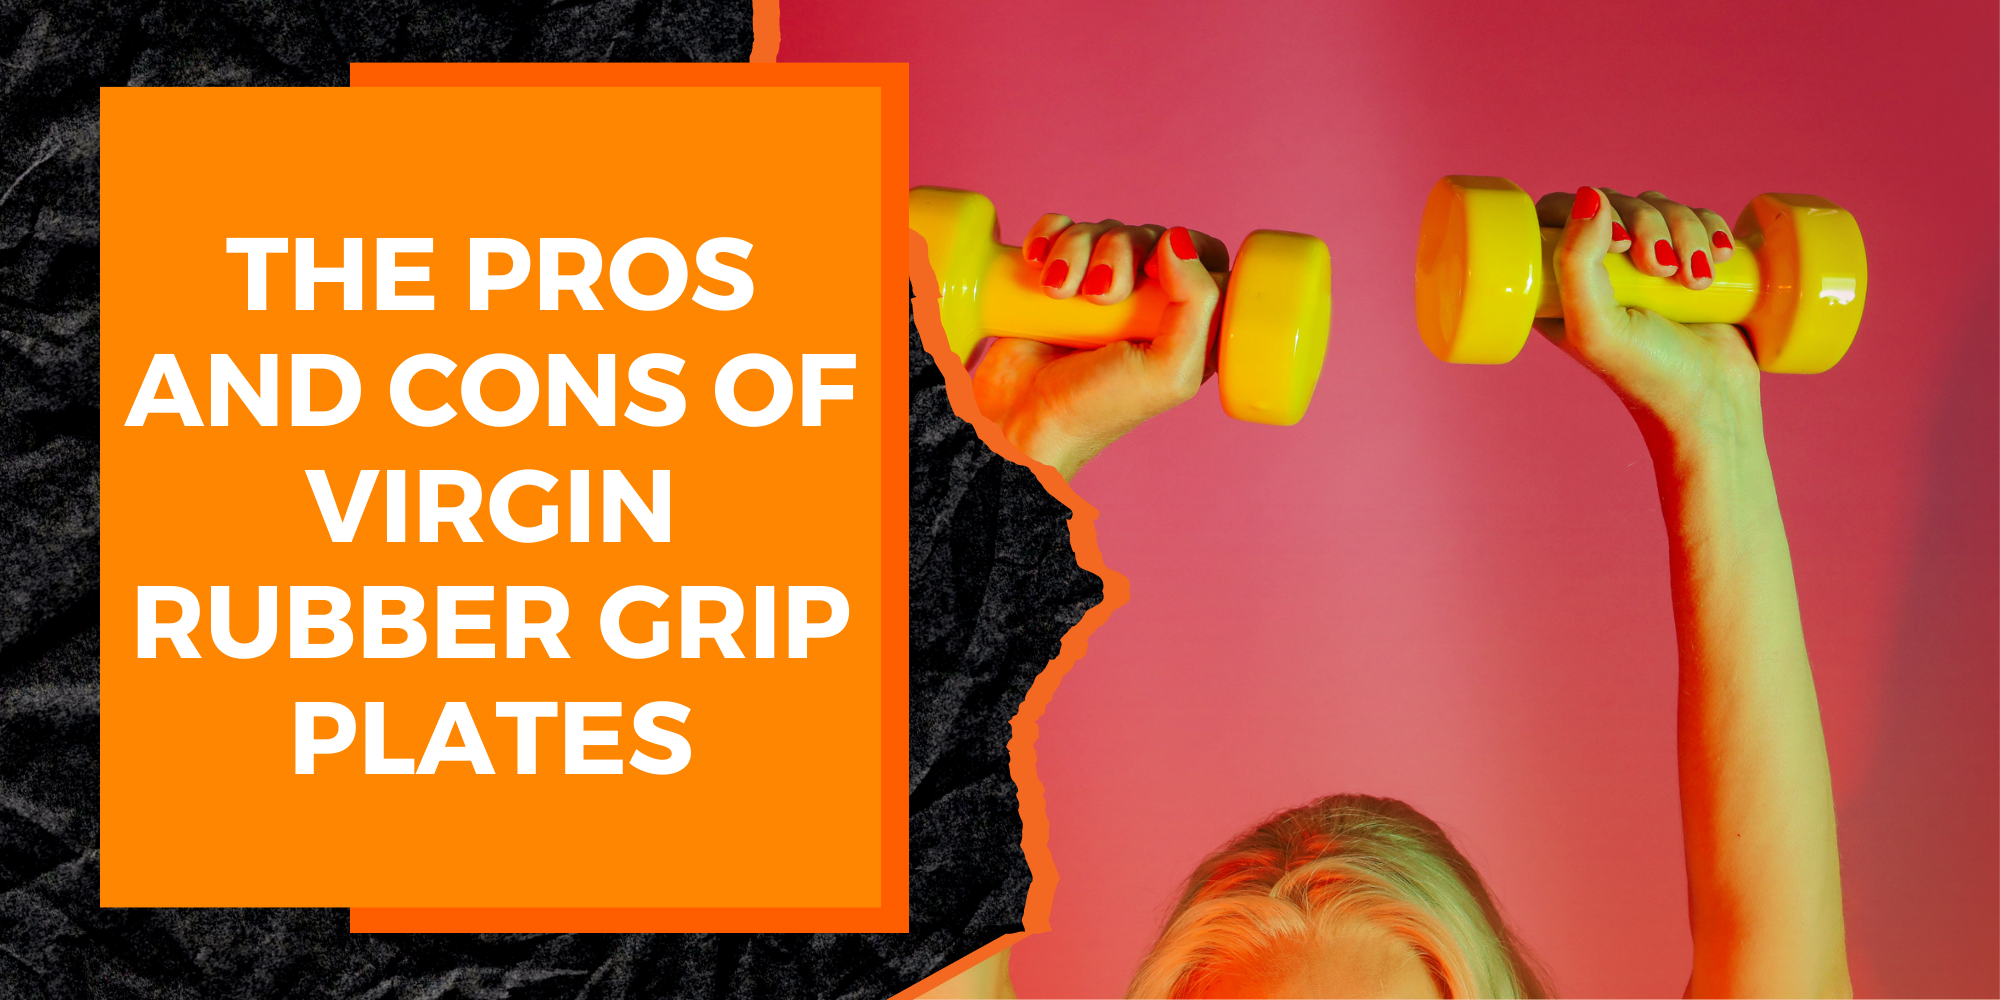 The Pros and Cons of Virgin Rubber Grip Plates